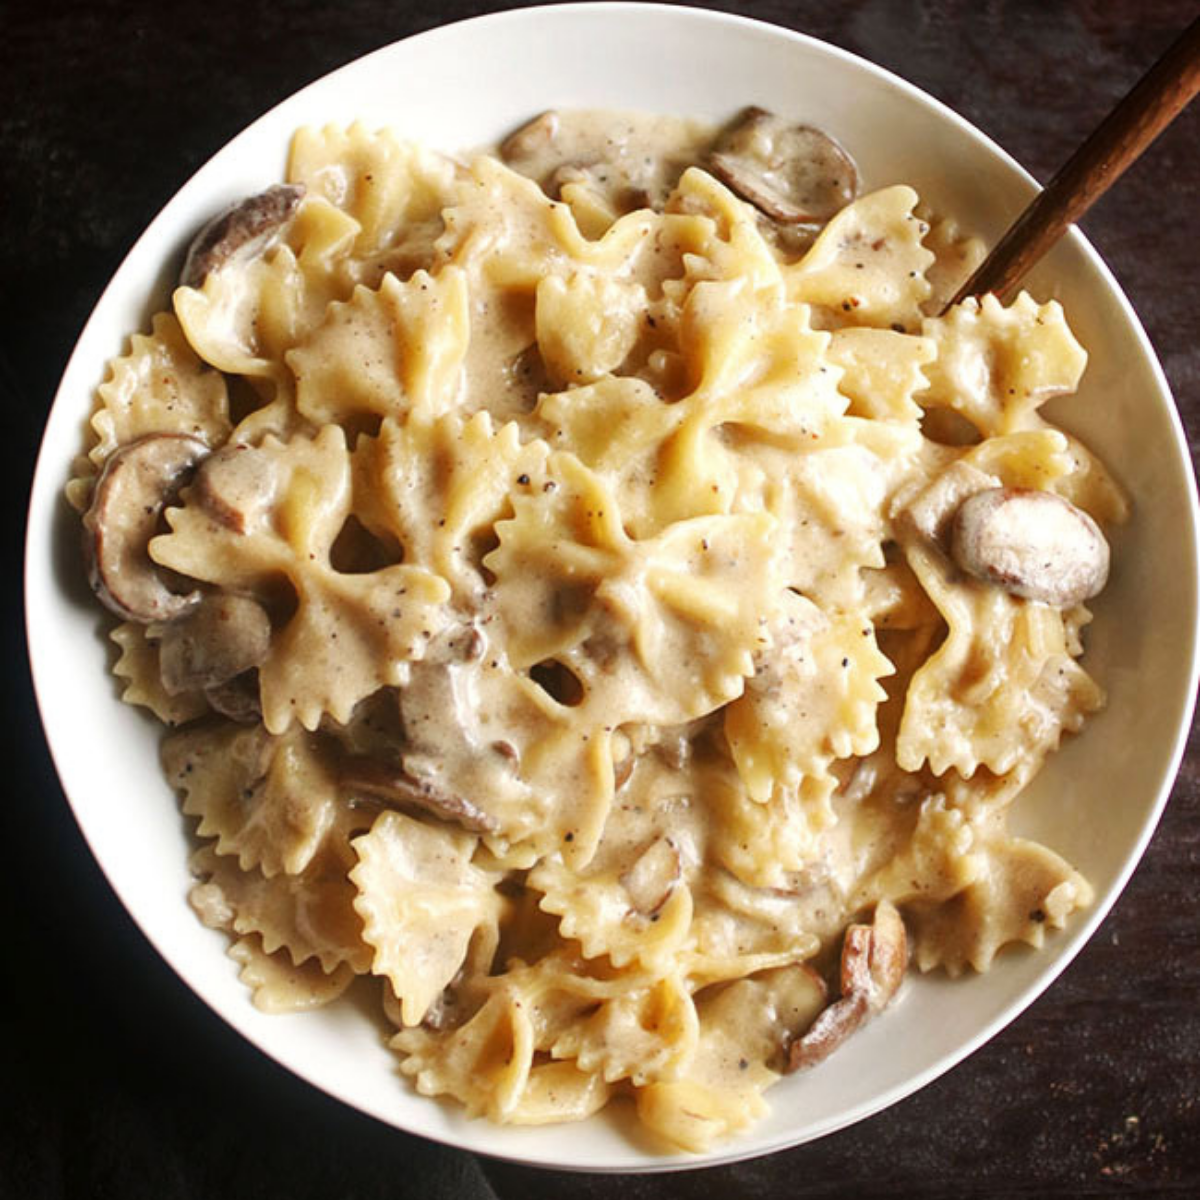 Bowtie pasta with creamy mushroom pasta sauce in a shallow white bowl on a brown background.